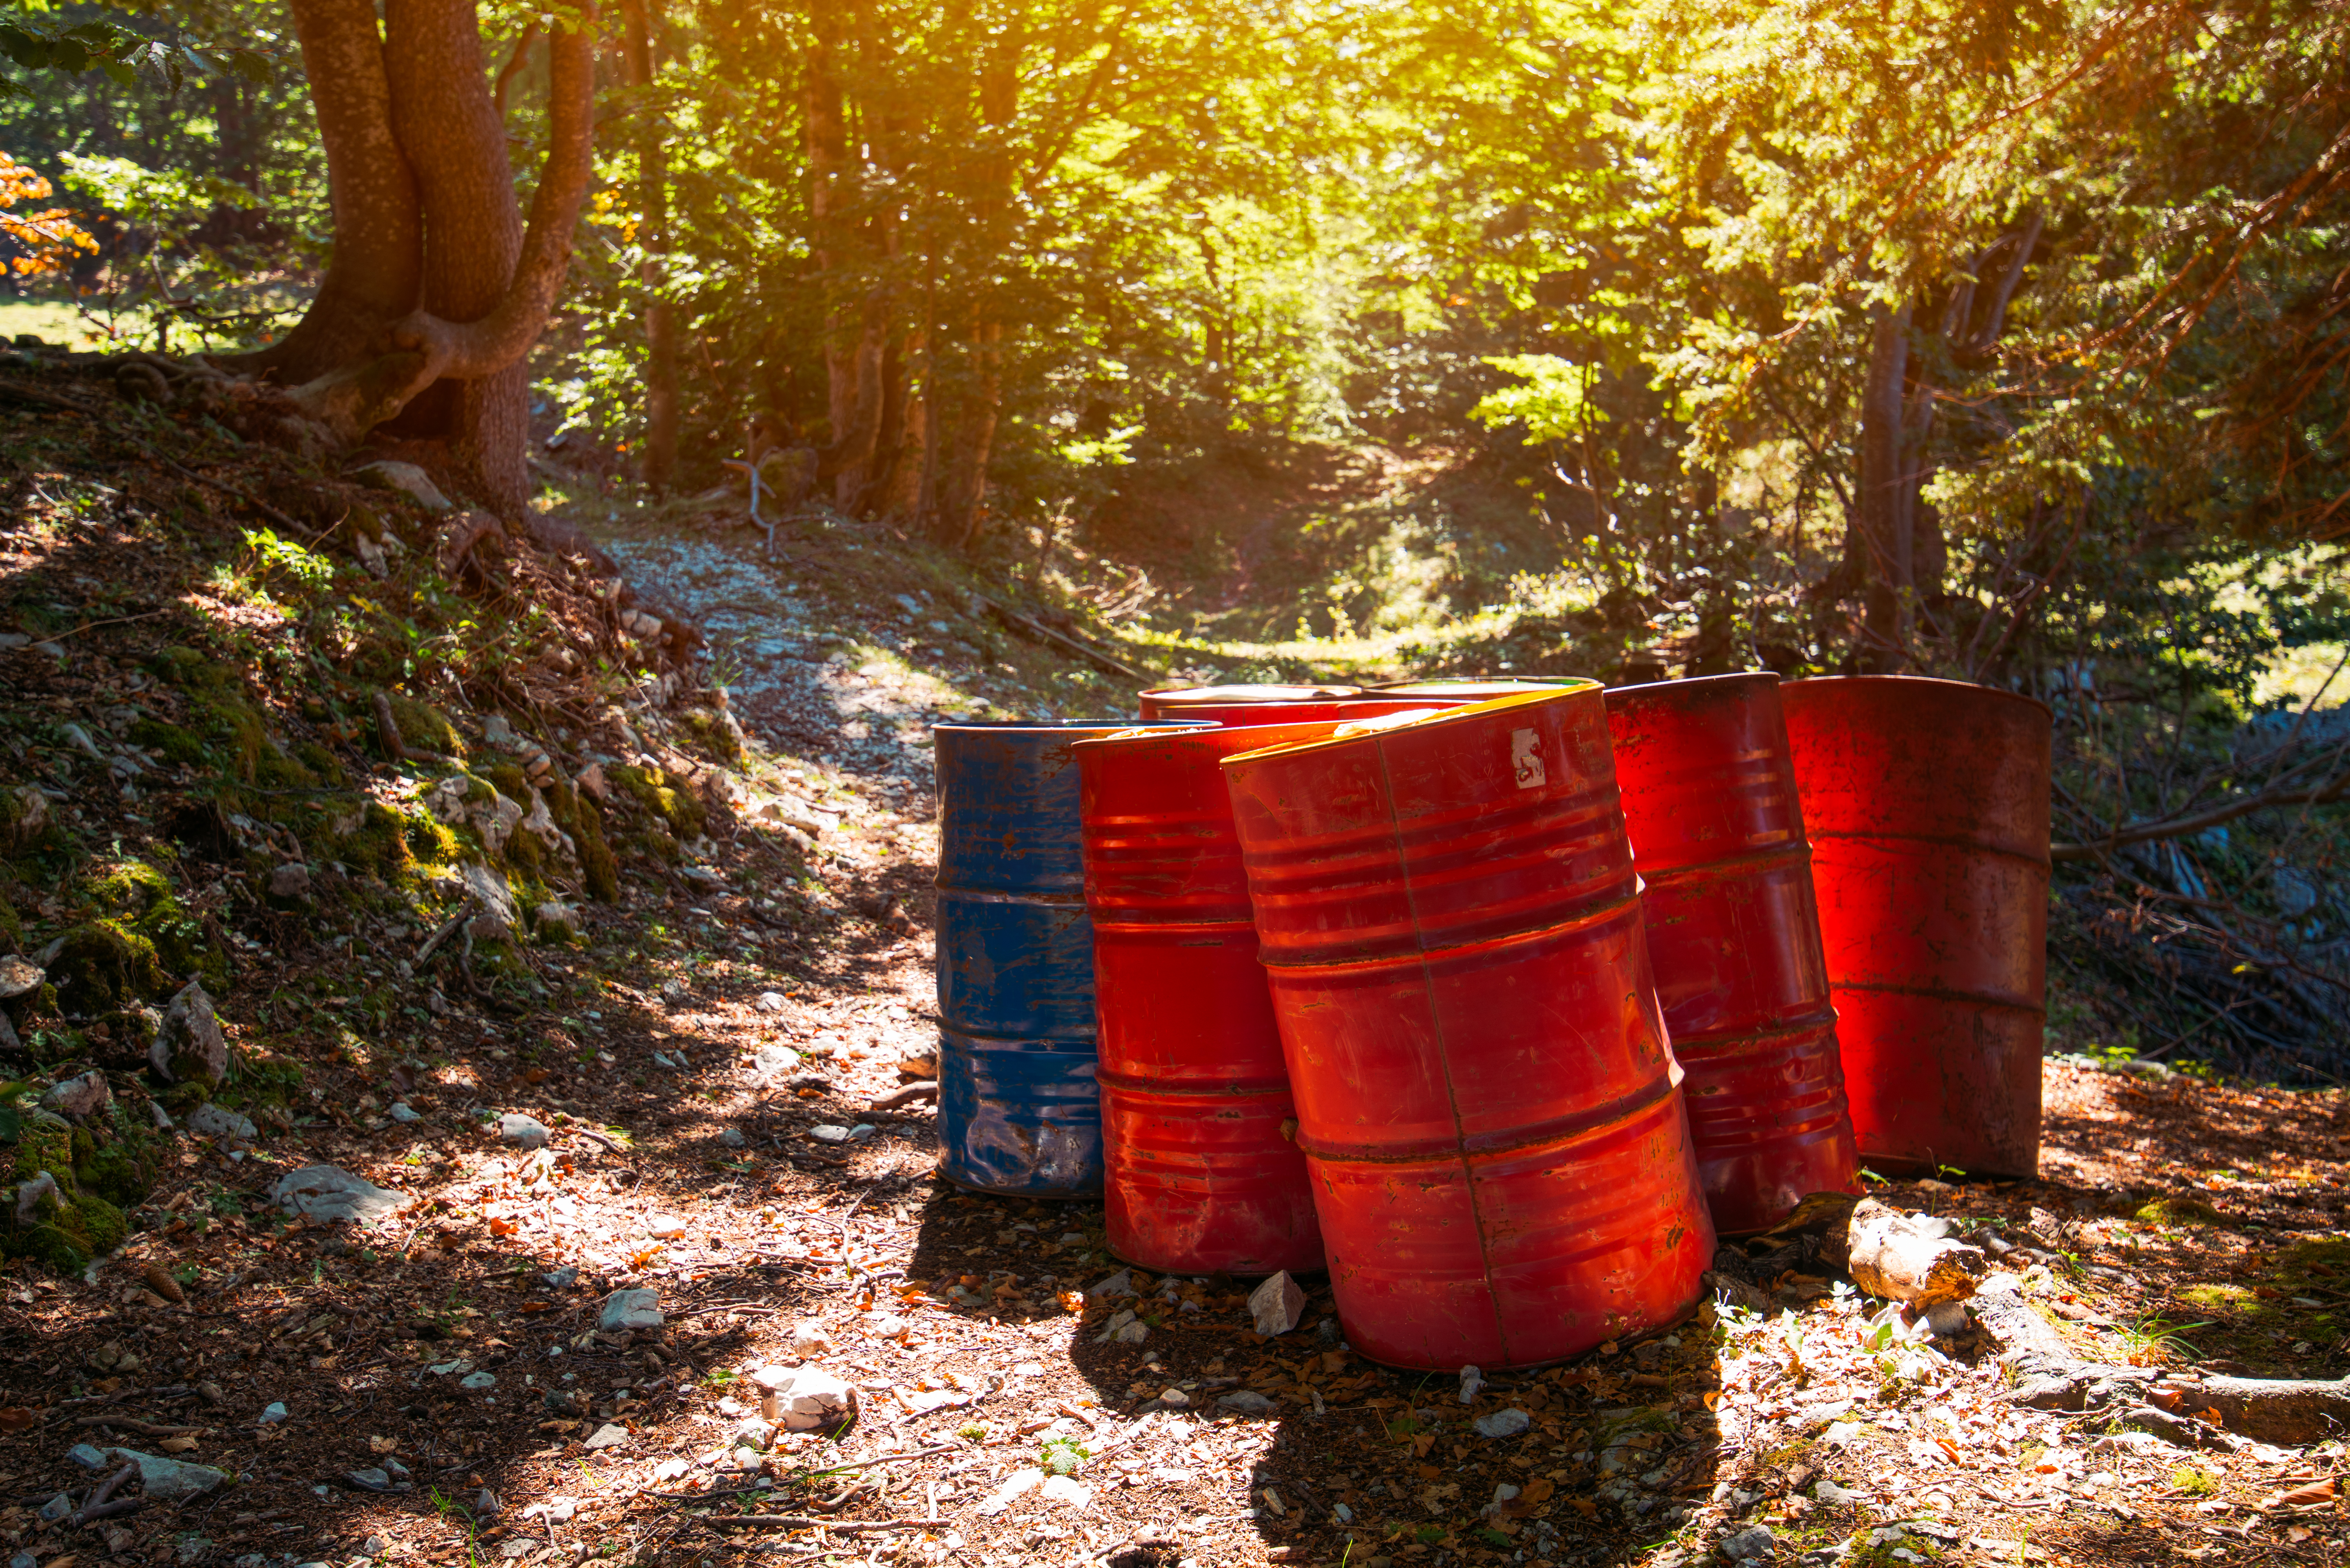 Toxic Waste Barrels In The Forest 2021 08 26 23 02 48 Utc